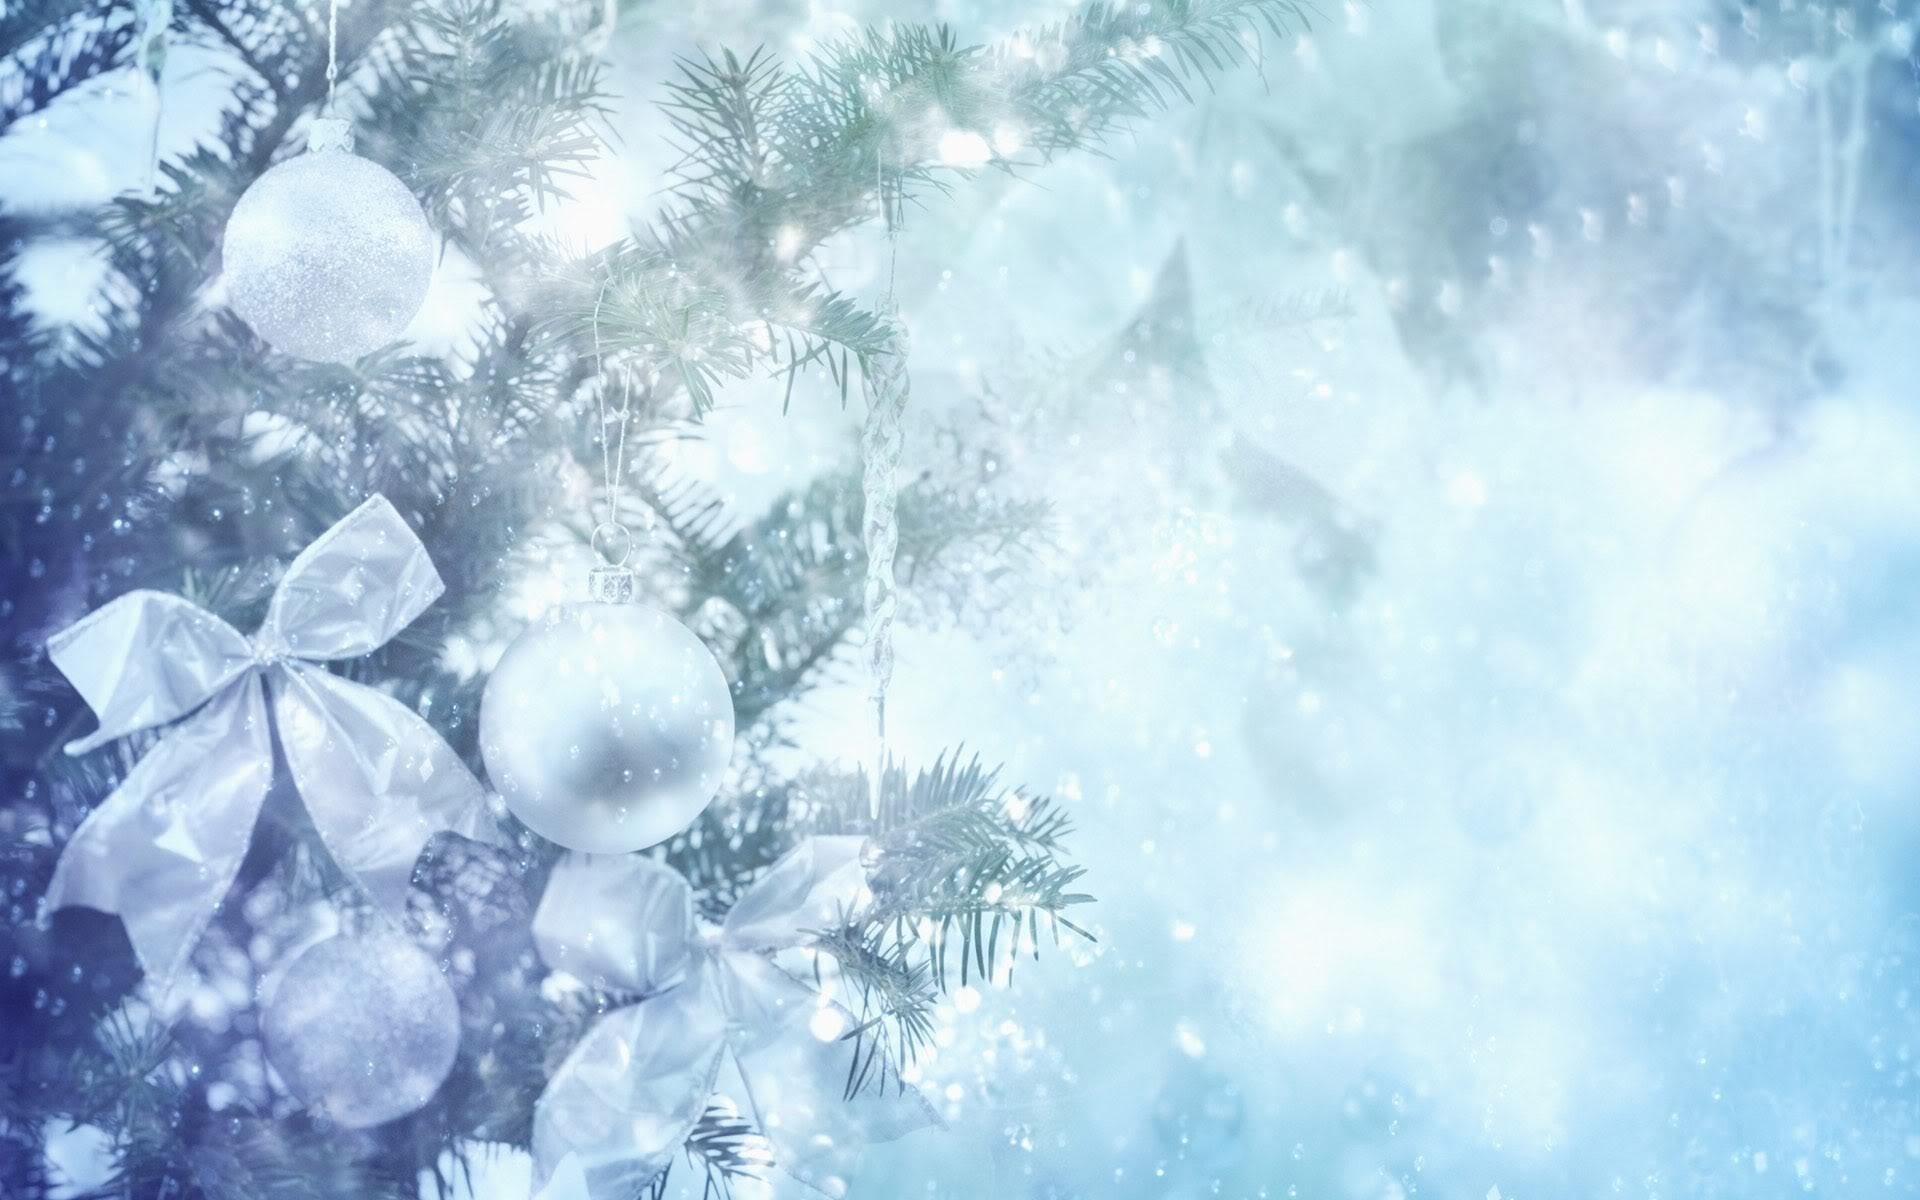 Free 3d, Car, Abstract, Holiday Wallpapers Free Desktop - High Resolution White Christmas Background - HD Wallpaper 